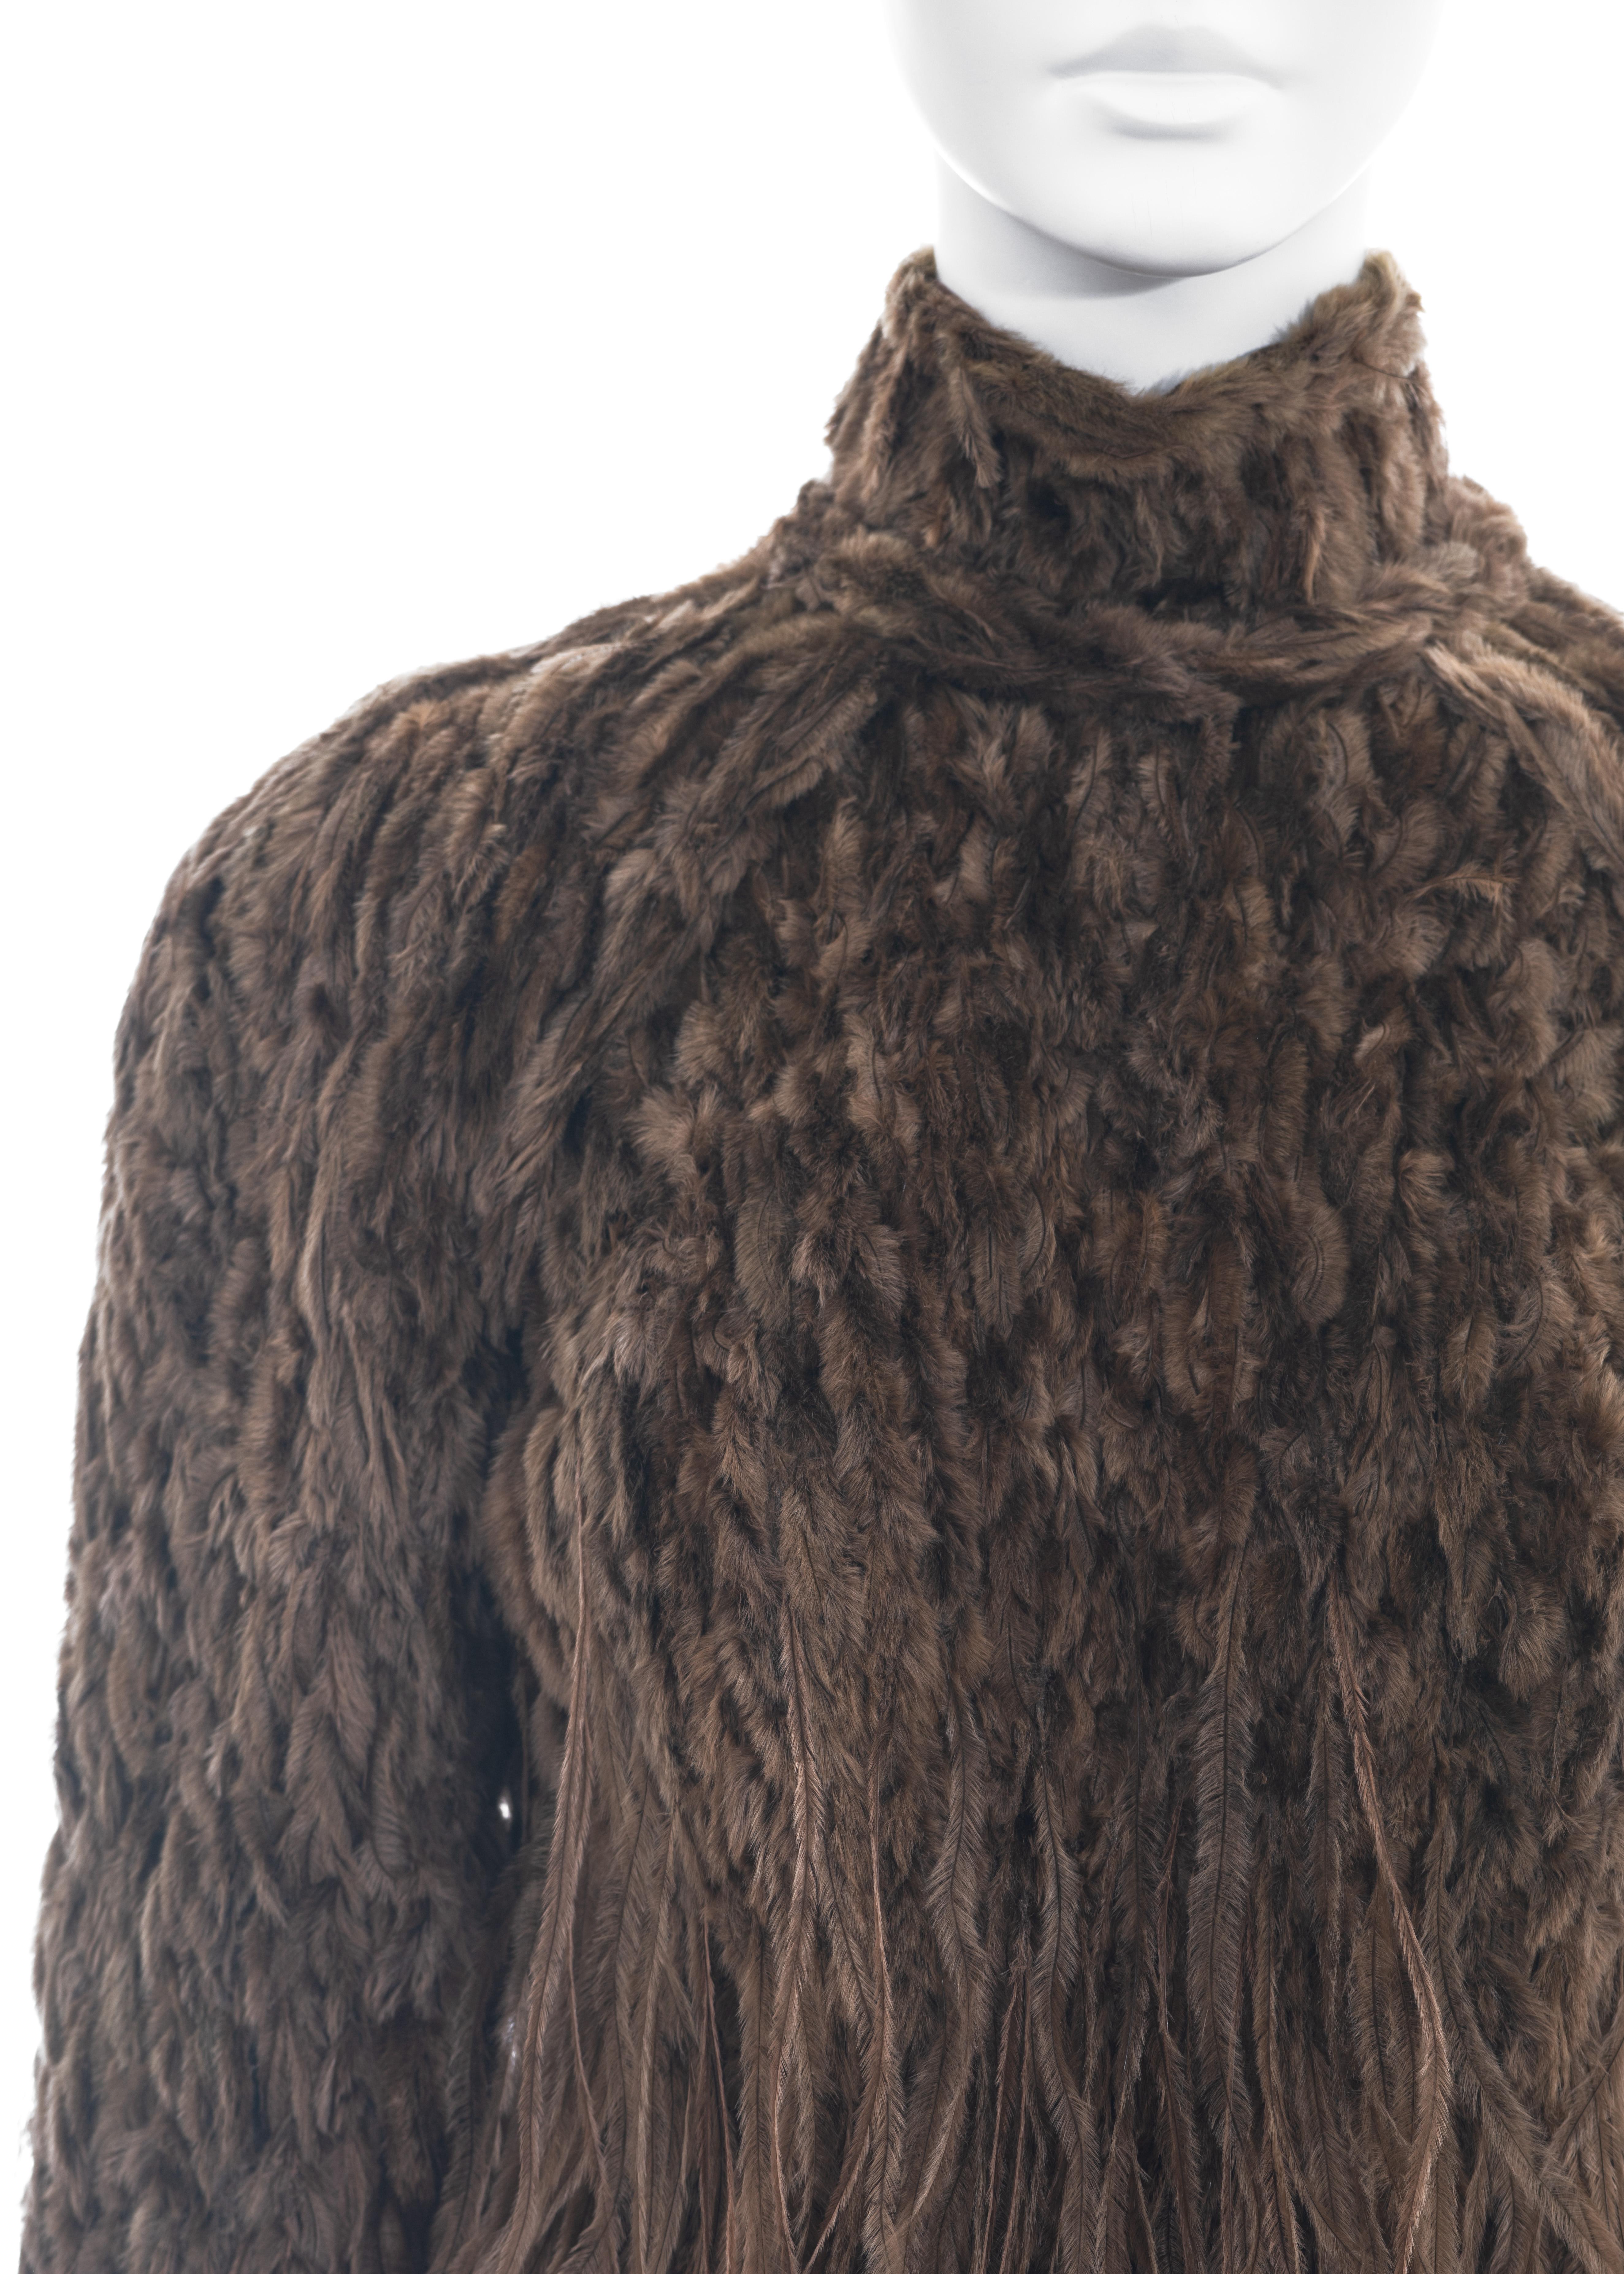 Black Jean Paul Gaultier Haute Couture brown fur and ostrich feather top, fw 1999 For Sale